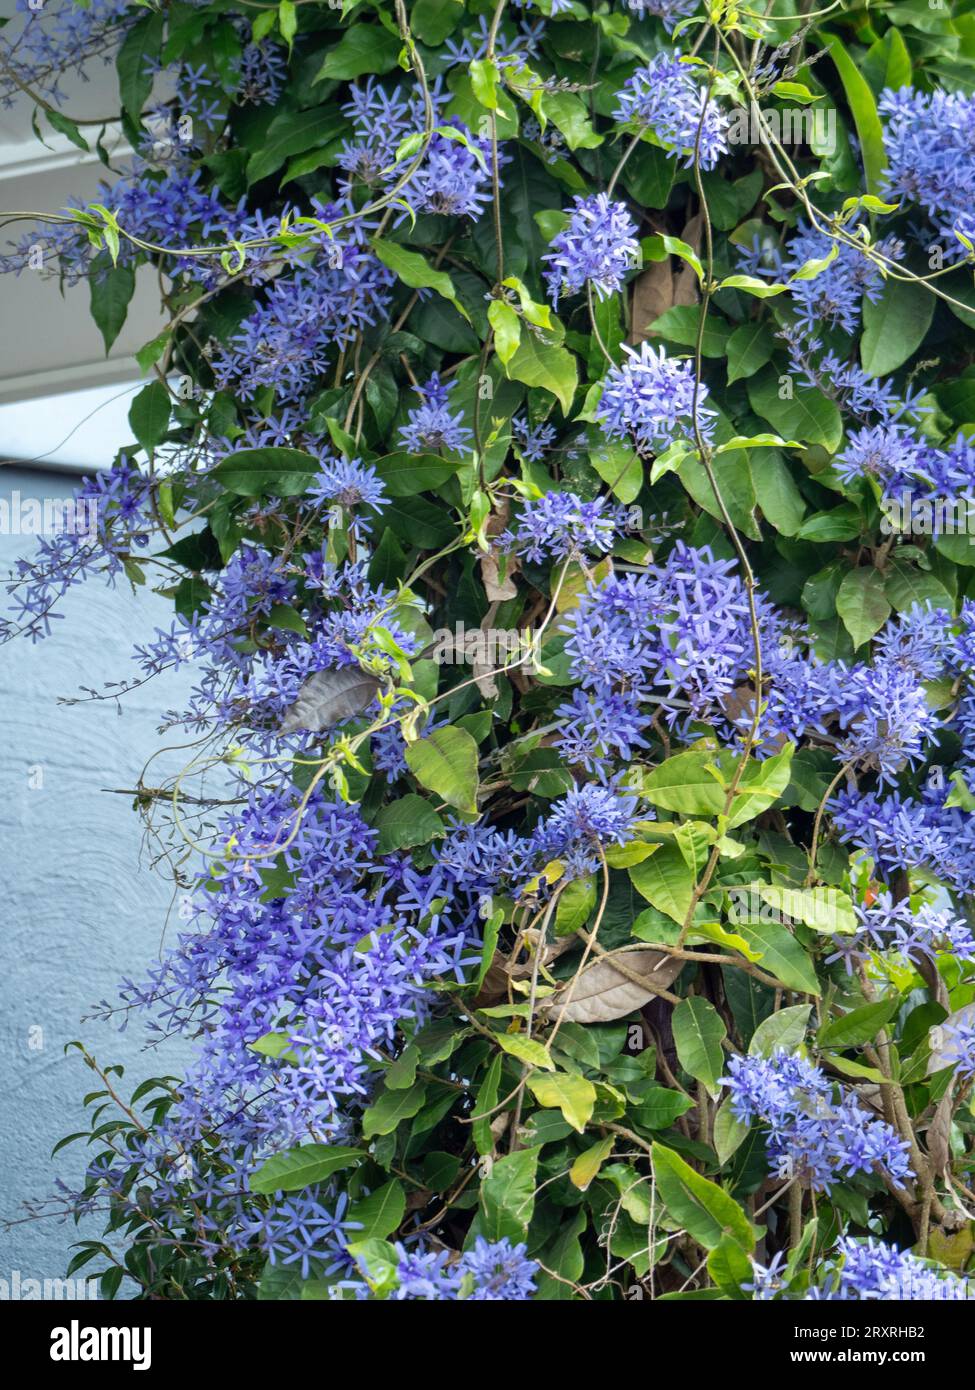 Petrea or Sandpaper Vine aka fake Wisterea, glorious purple flowers blooming in profusion, wound around a pole Stock Photo